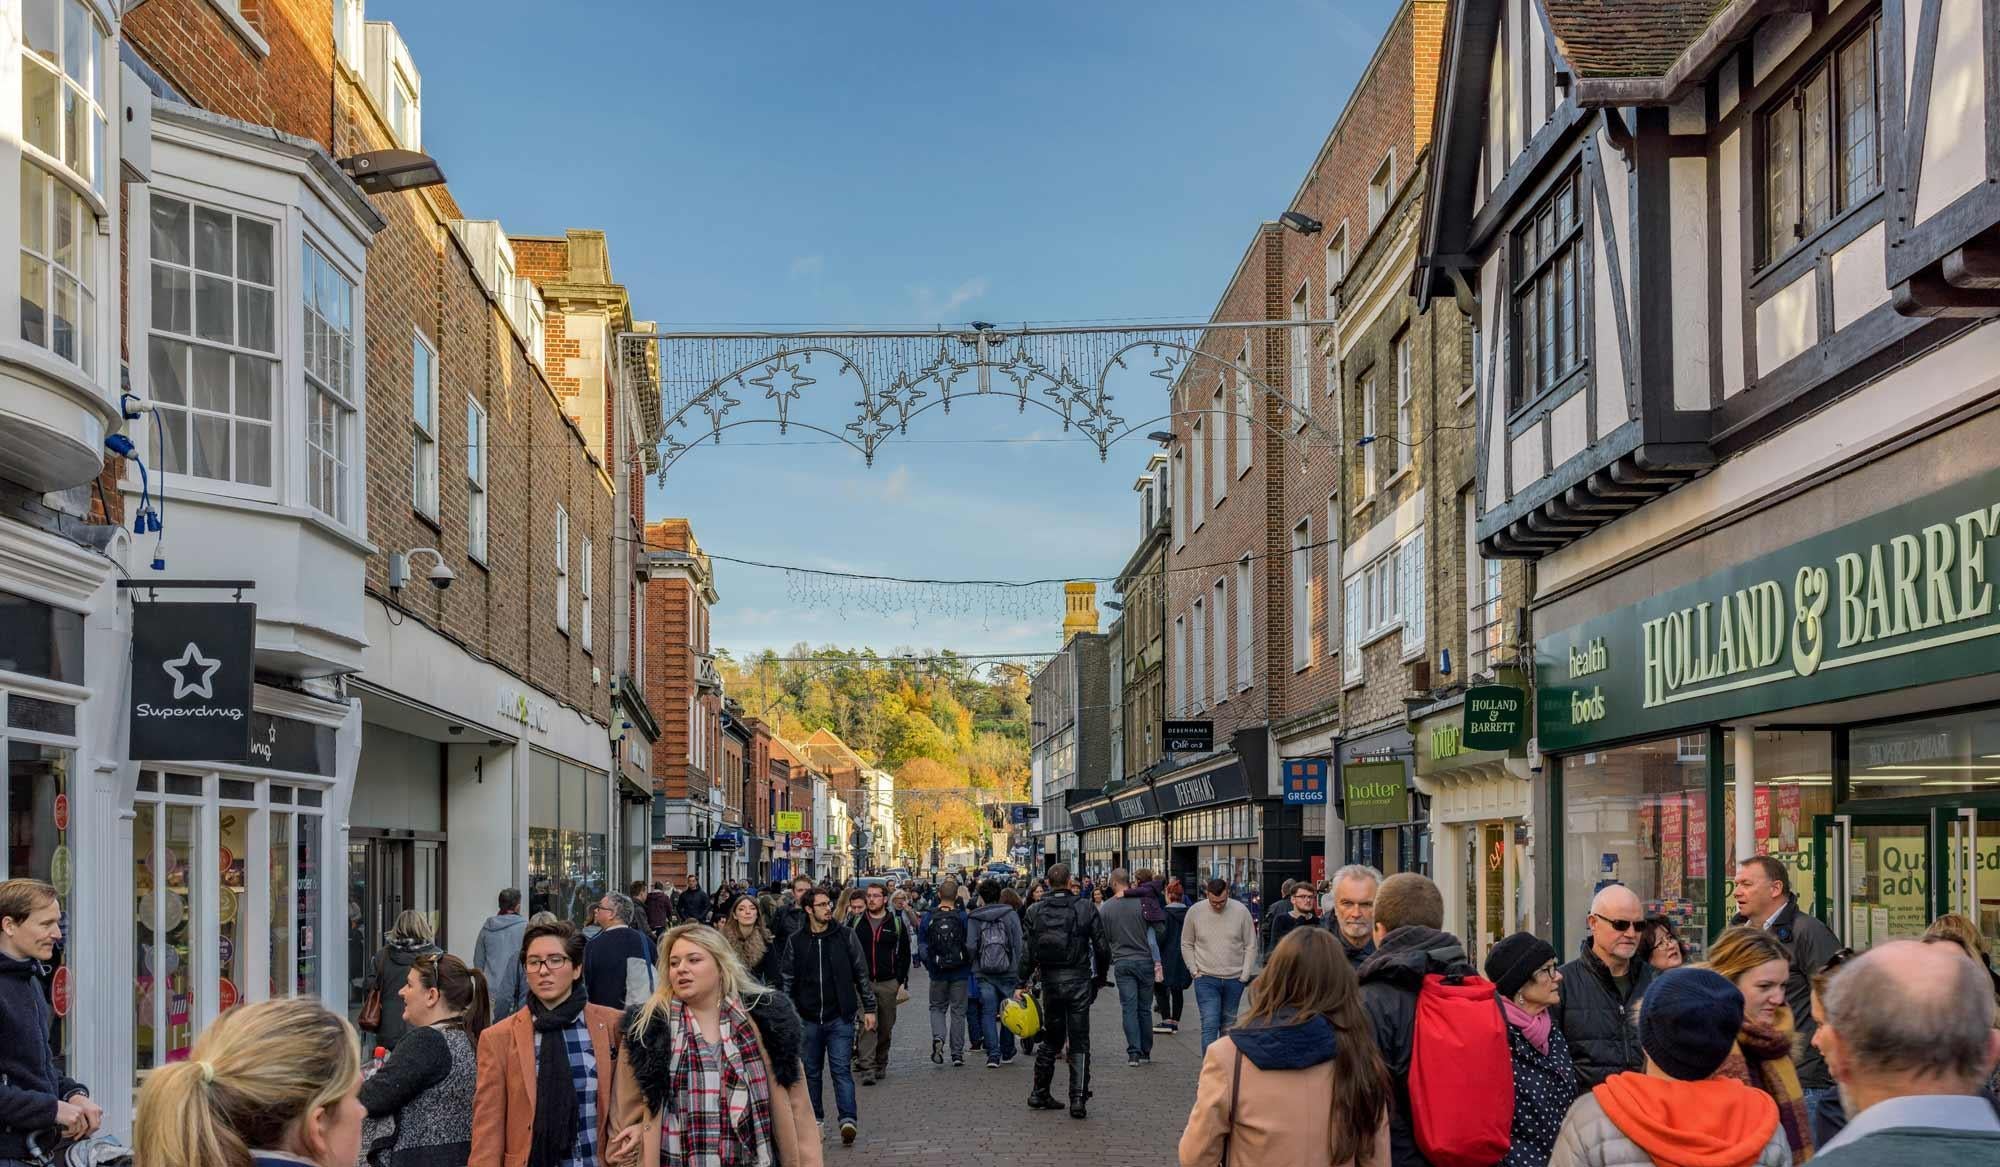 Winchester has been named the UK city with the best quality of life, according to a Halifax survey